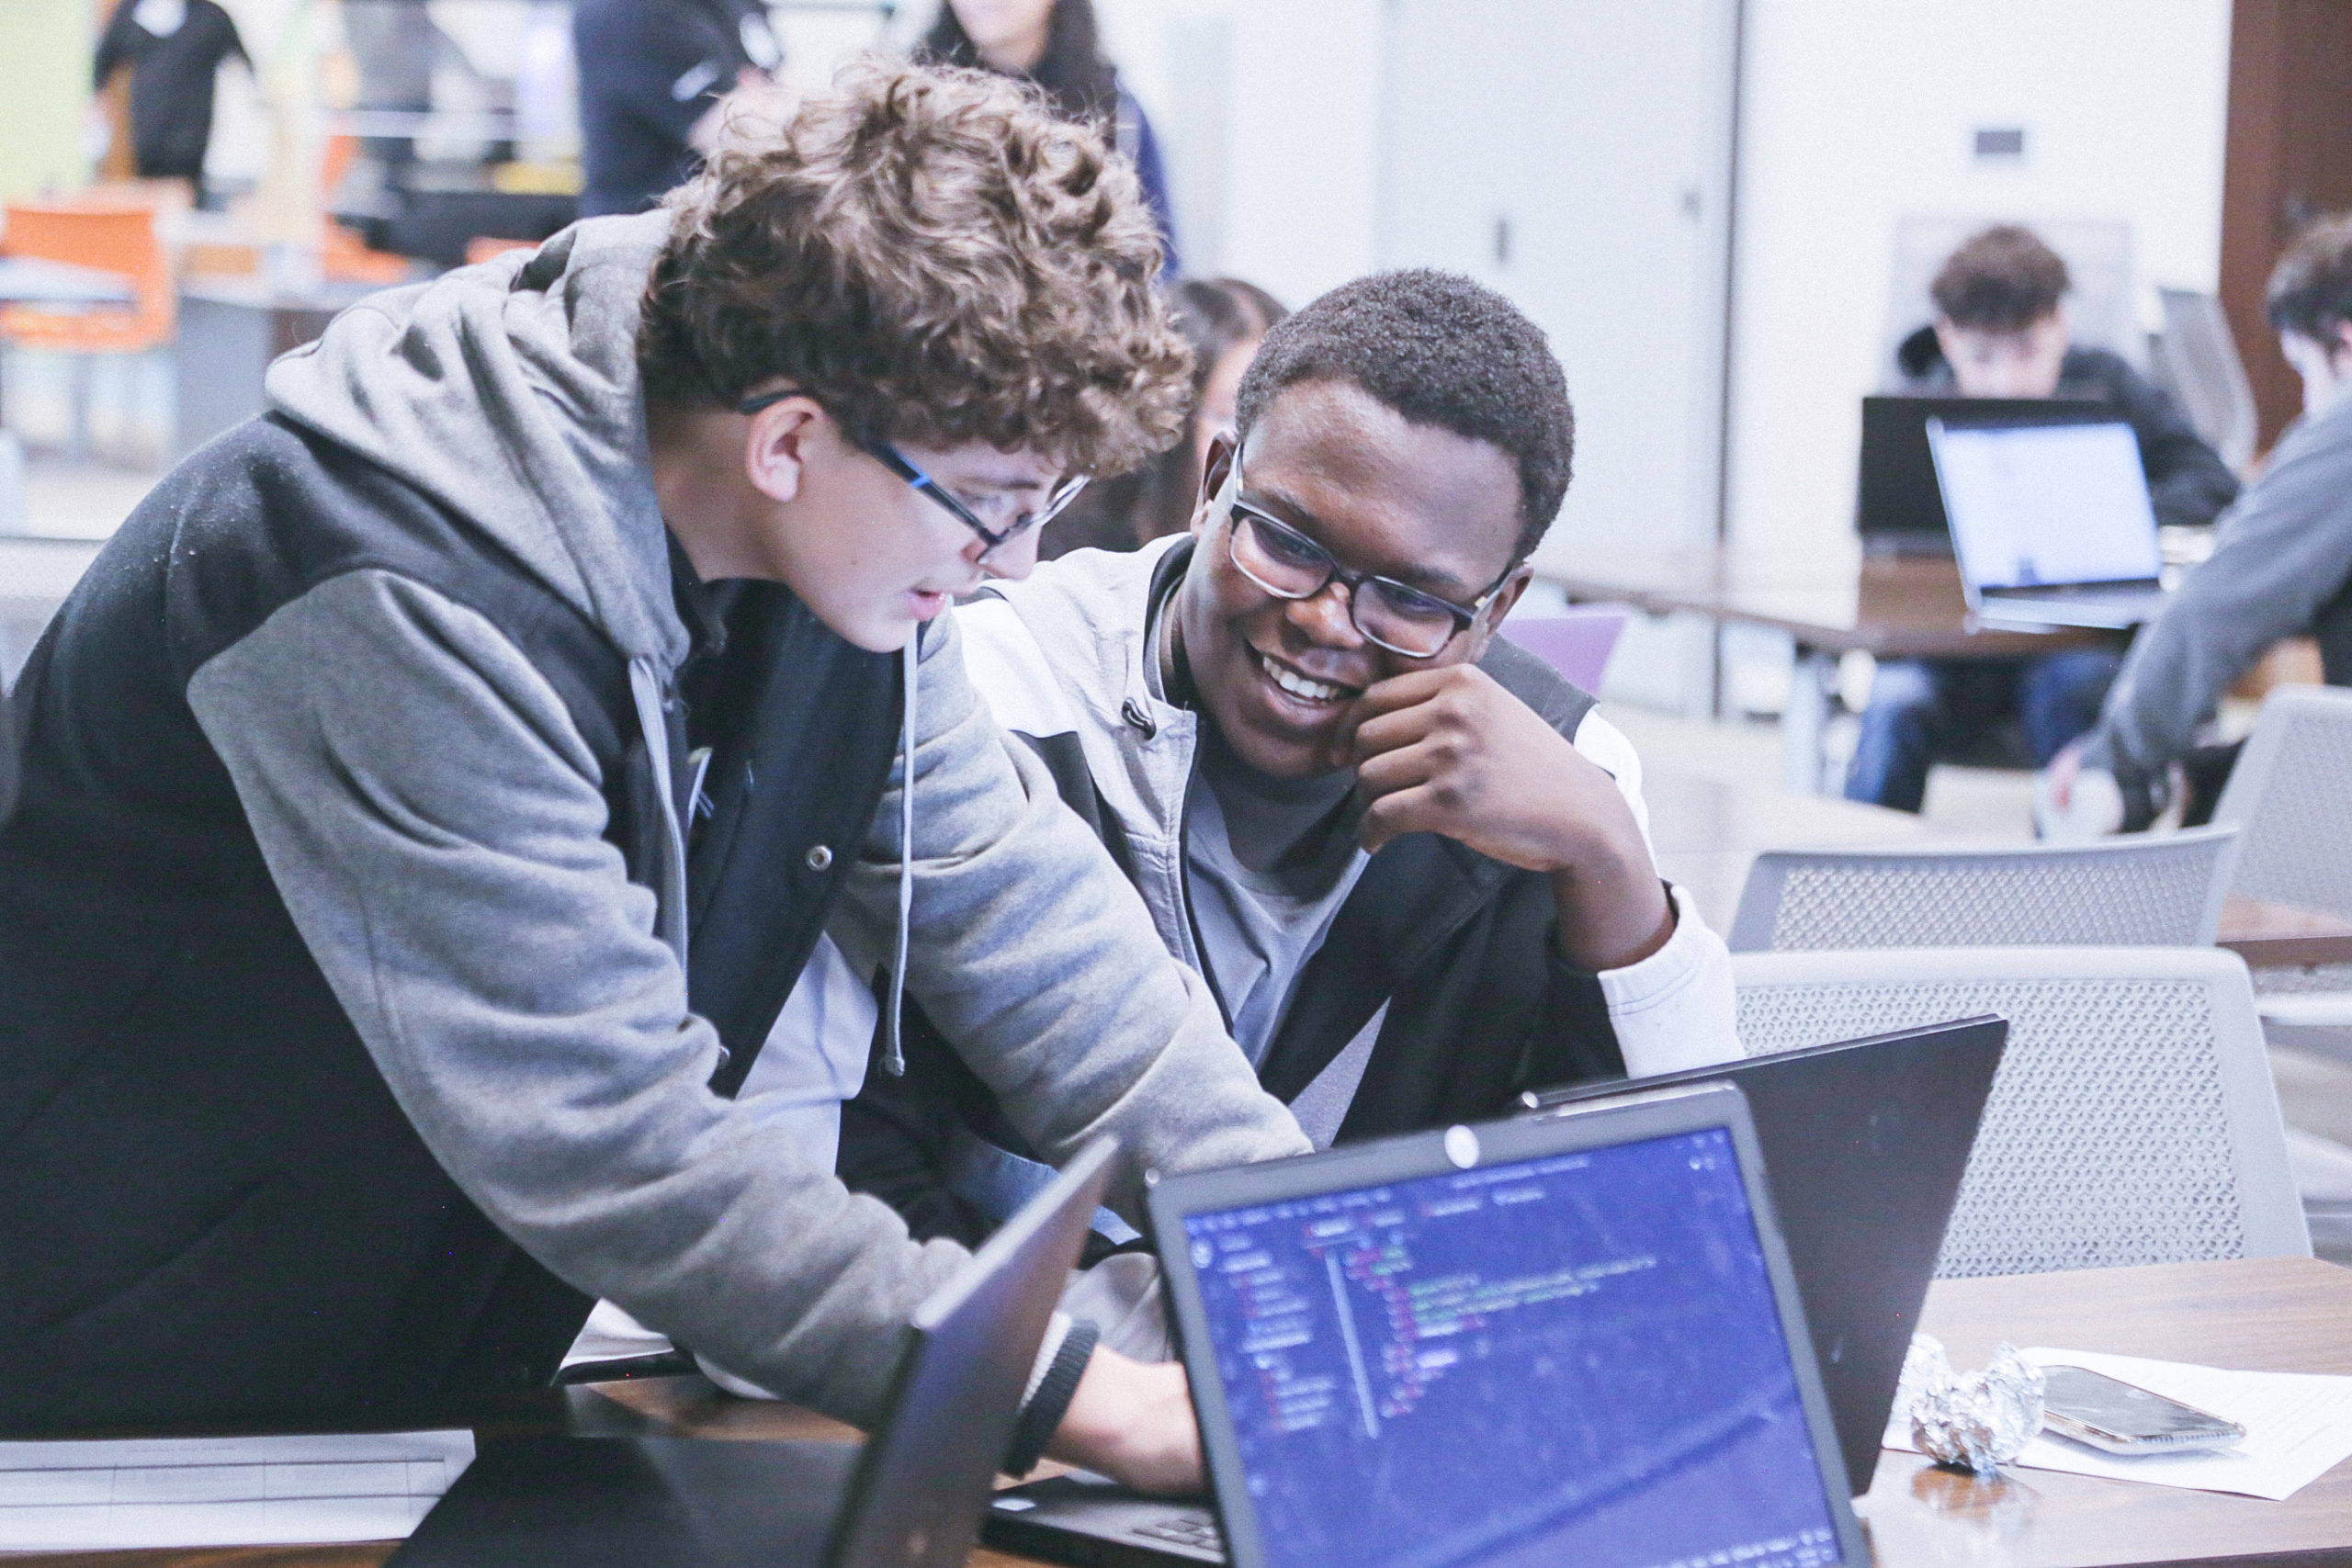 Emmanuel Ahonle (C2C ‘20) and Samuel Gunter (C2C ‘20) working together on their technical project at our first Hackathon prepping for Demo Day!